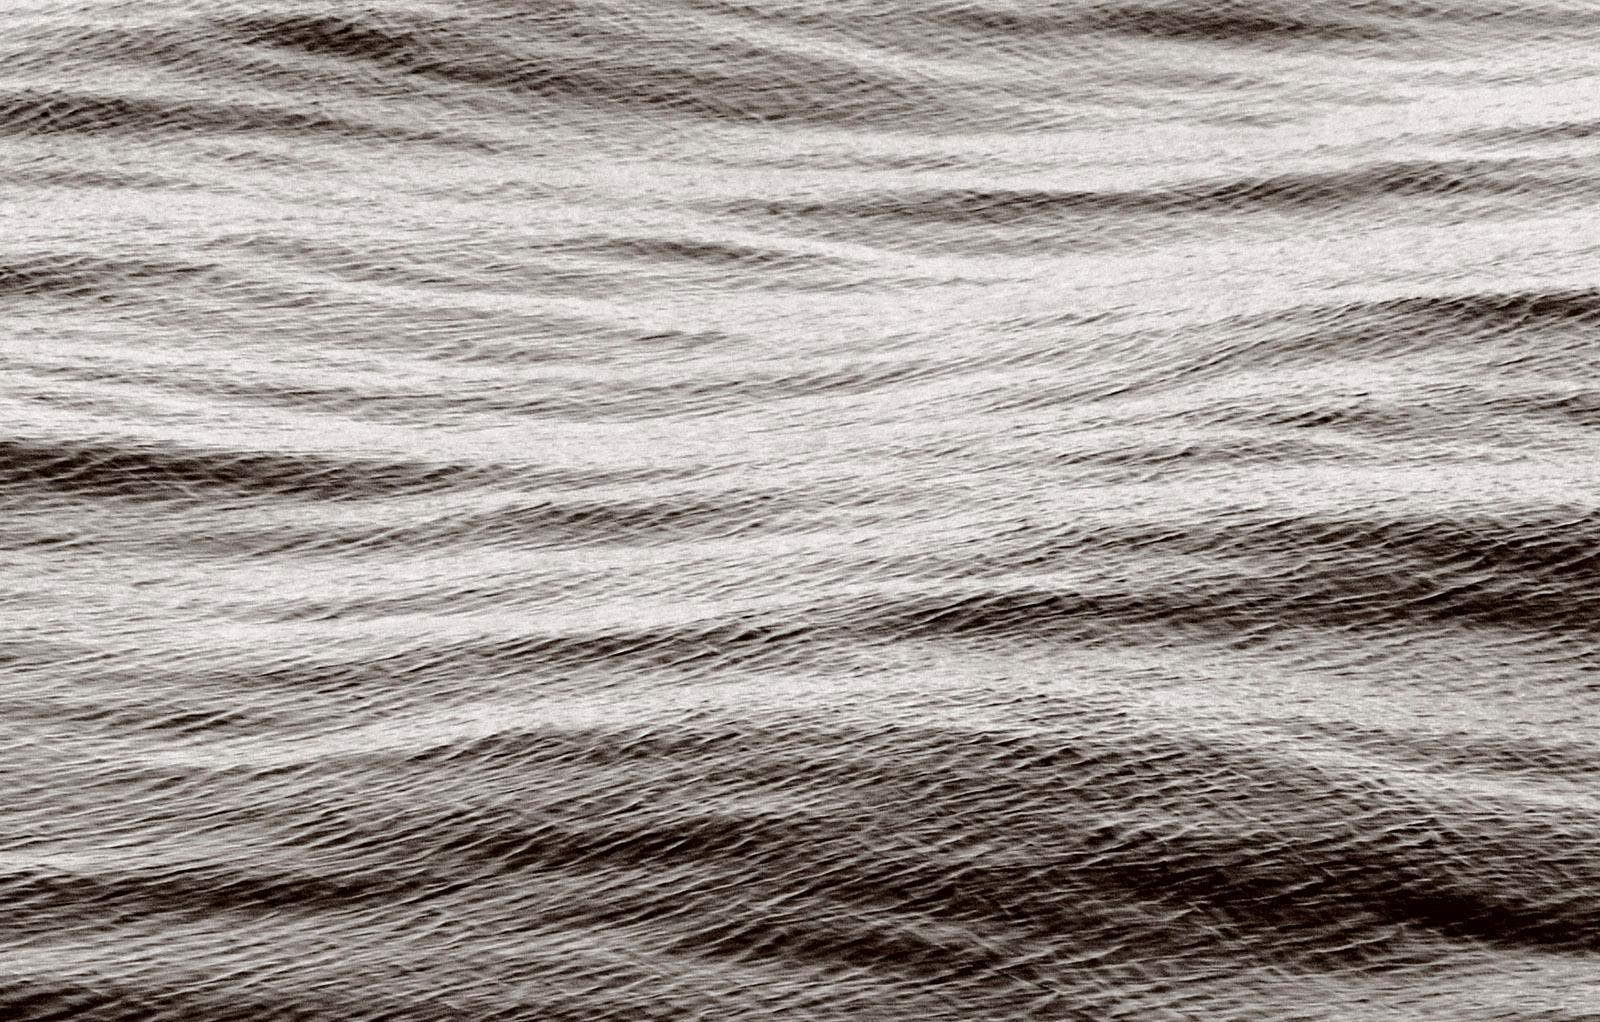 Flowing 2  -  Large scale photograph by Michael Banks -Archival Pigment print on fiber based paper ( Hahnemühle Photo RAG Baryta 315 gsm )

Limited Editions of 5  , signed + numbered by artist, with certificate of authenticity 

Archival pigment